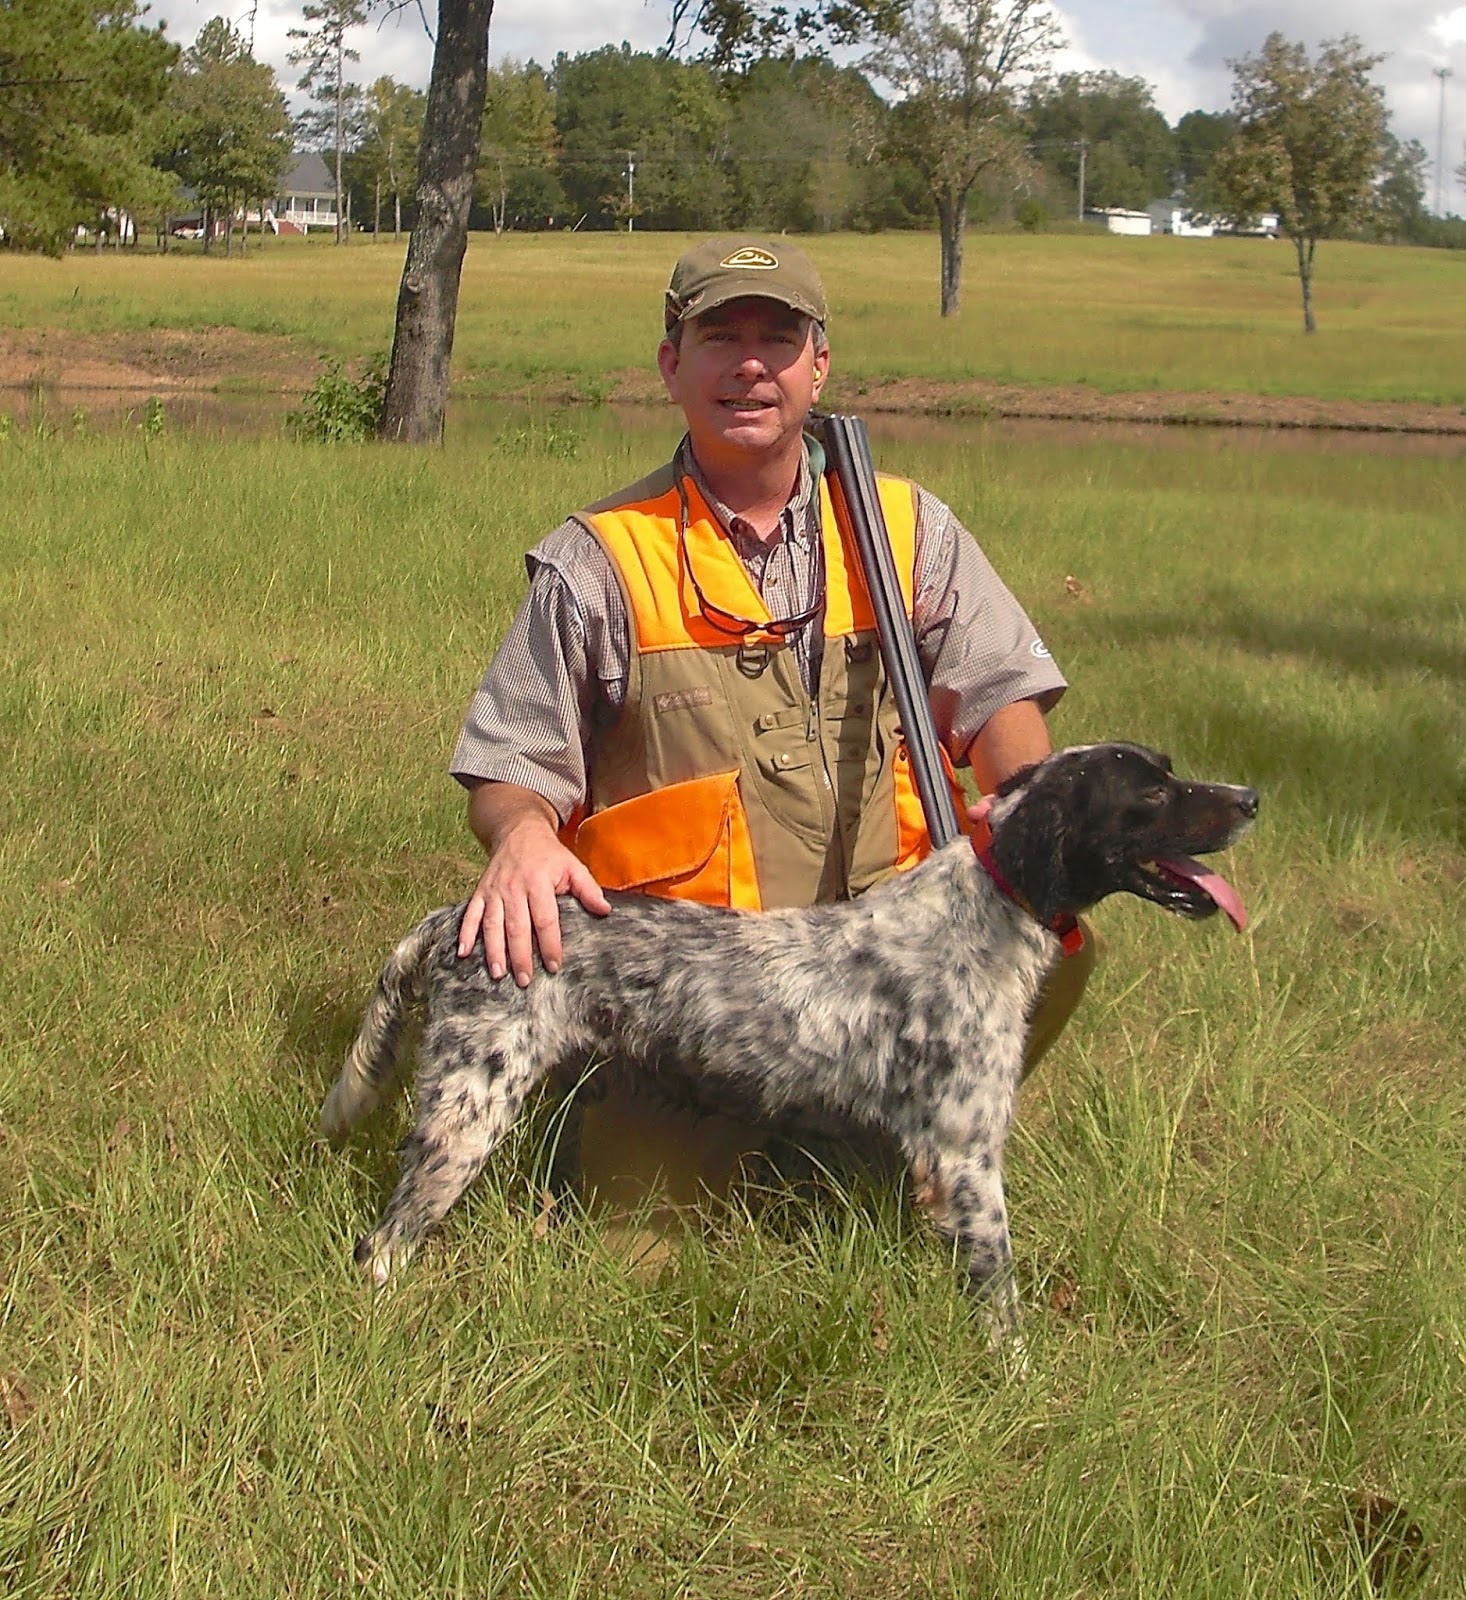 Lowcountry outdoors: Quail Hunting 101 - Walking Behind Bird Dogs